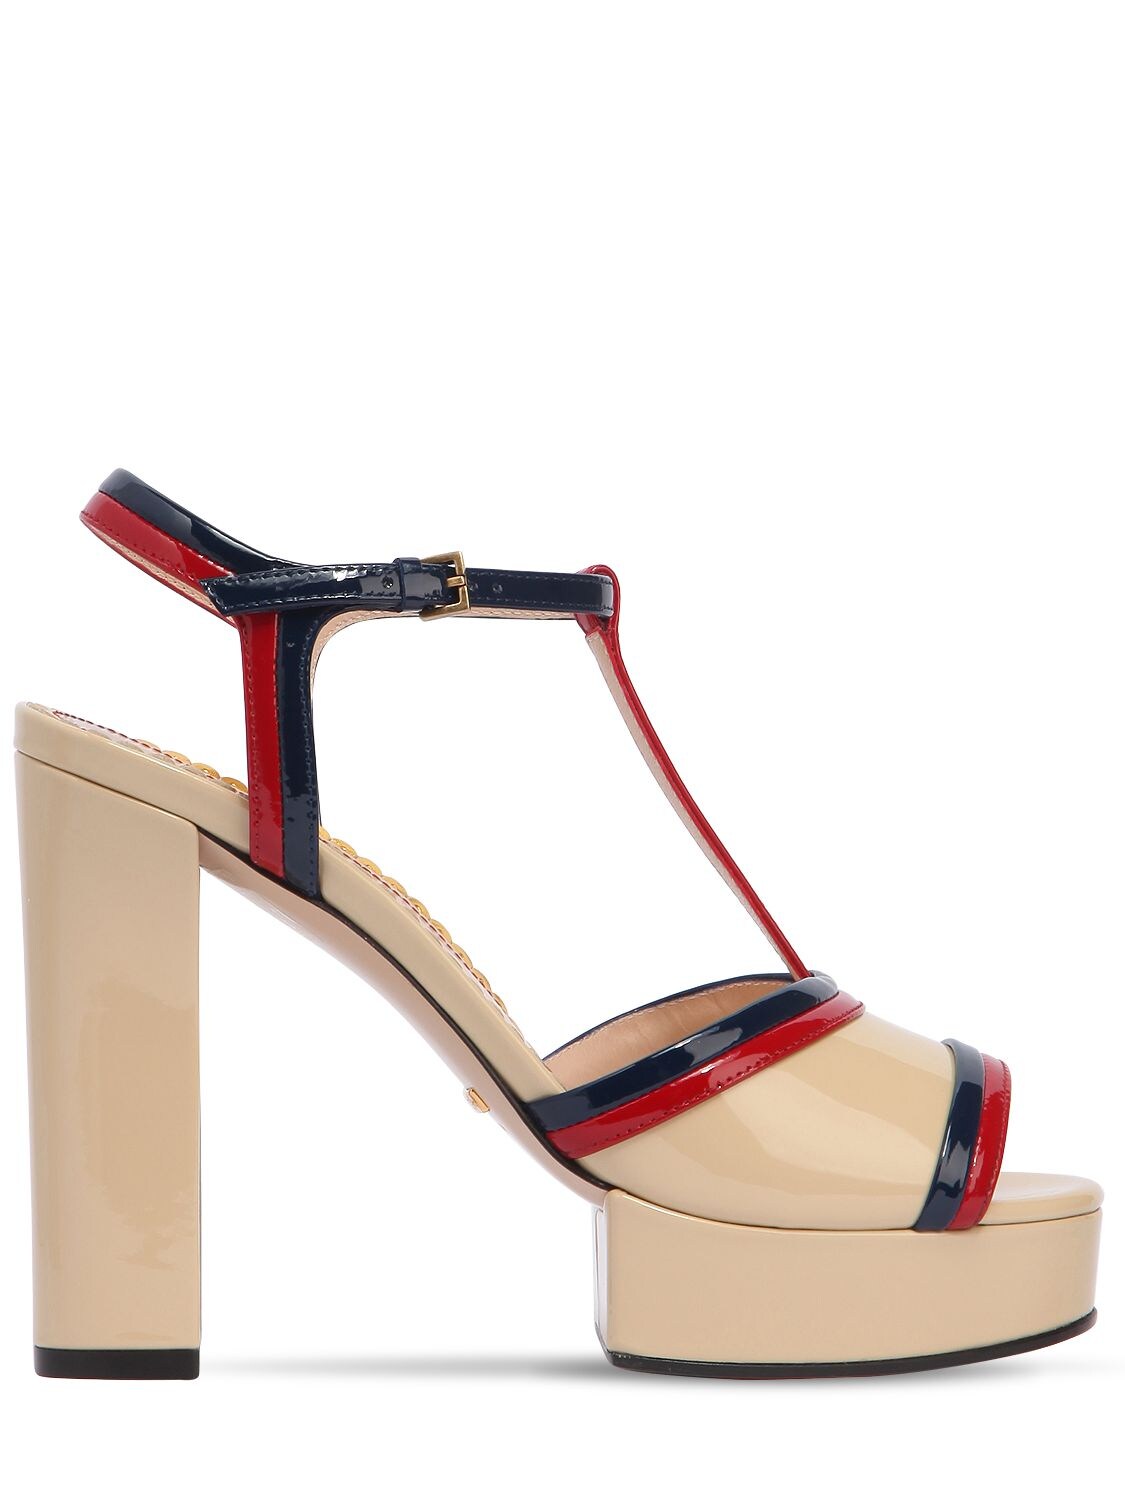 GUCCI 130MM MILLIE PATENT LEATHER SANDALS,67II9H019-NjQ4Nw2